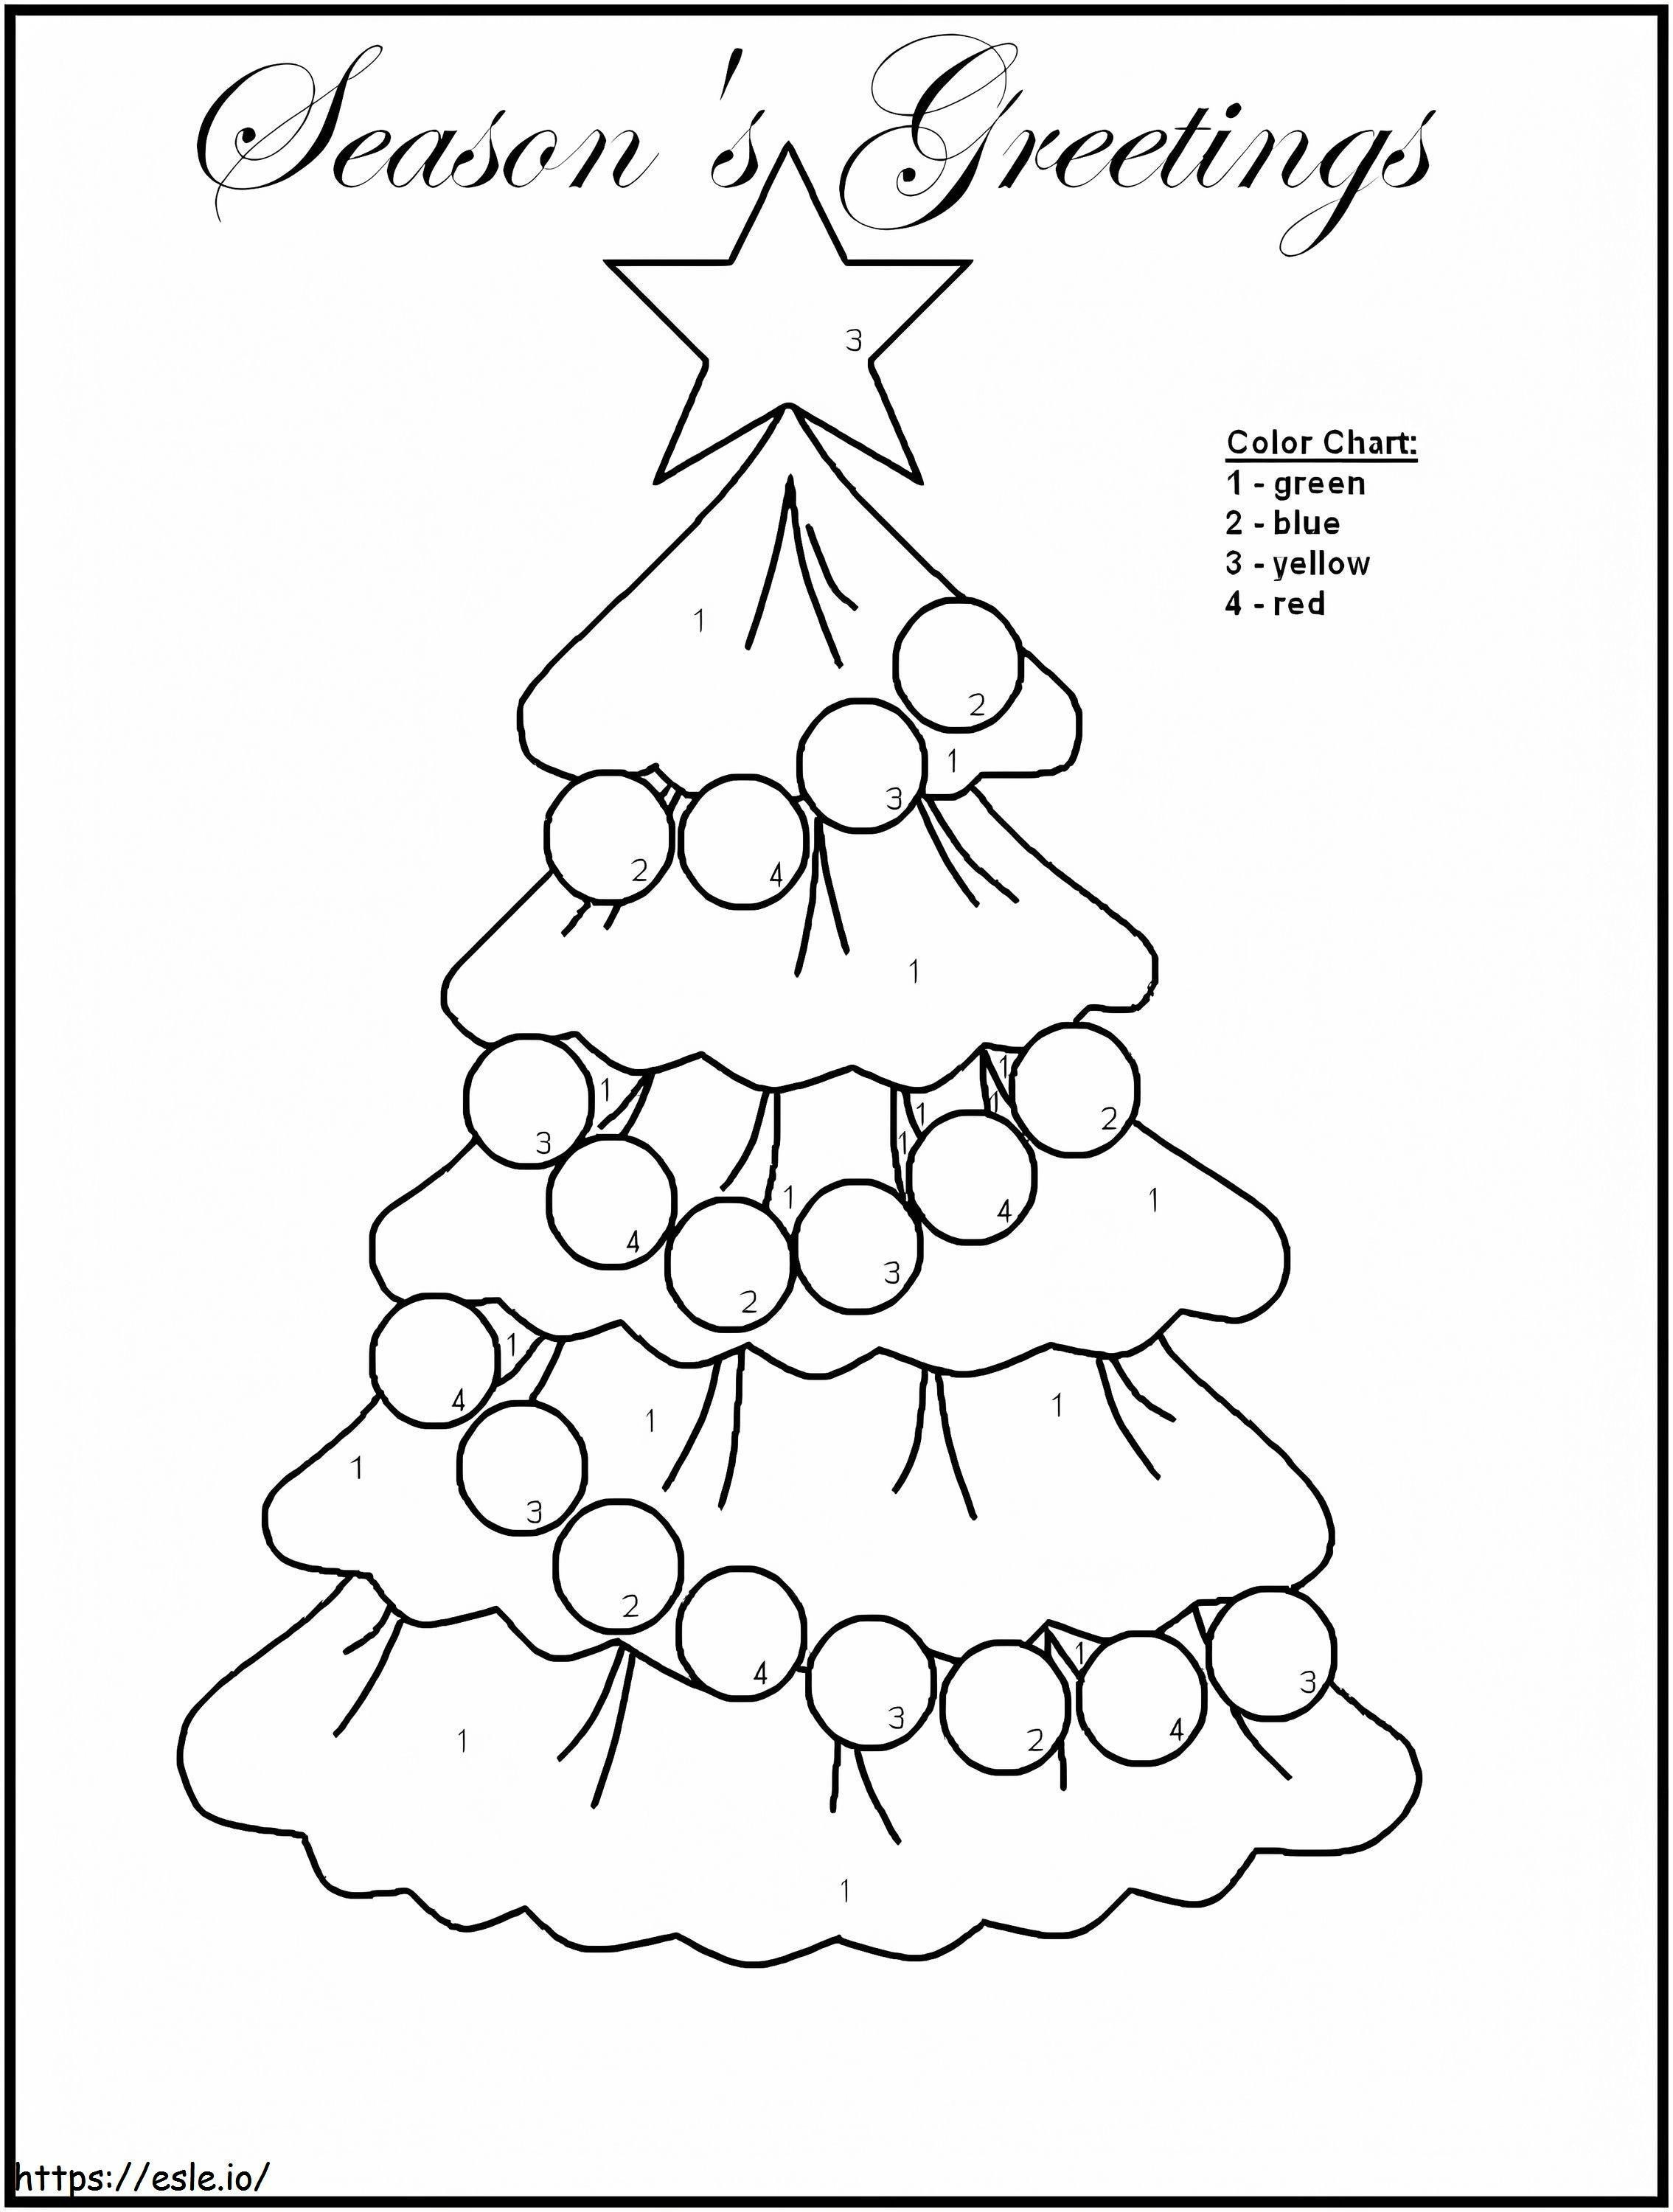 Nice Christmas Tree Color By Number coloring page